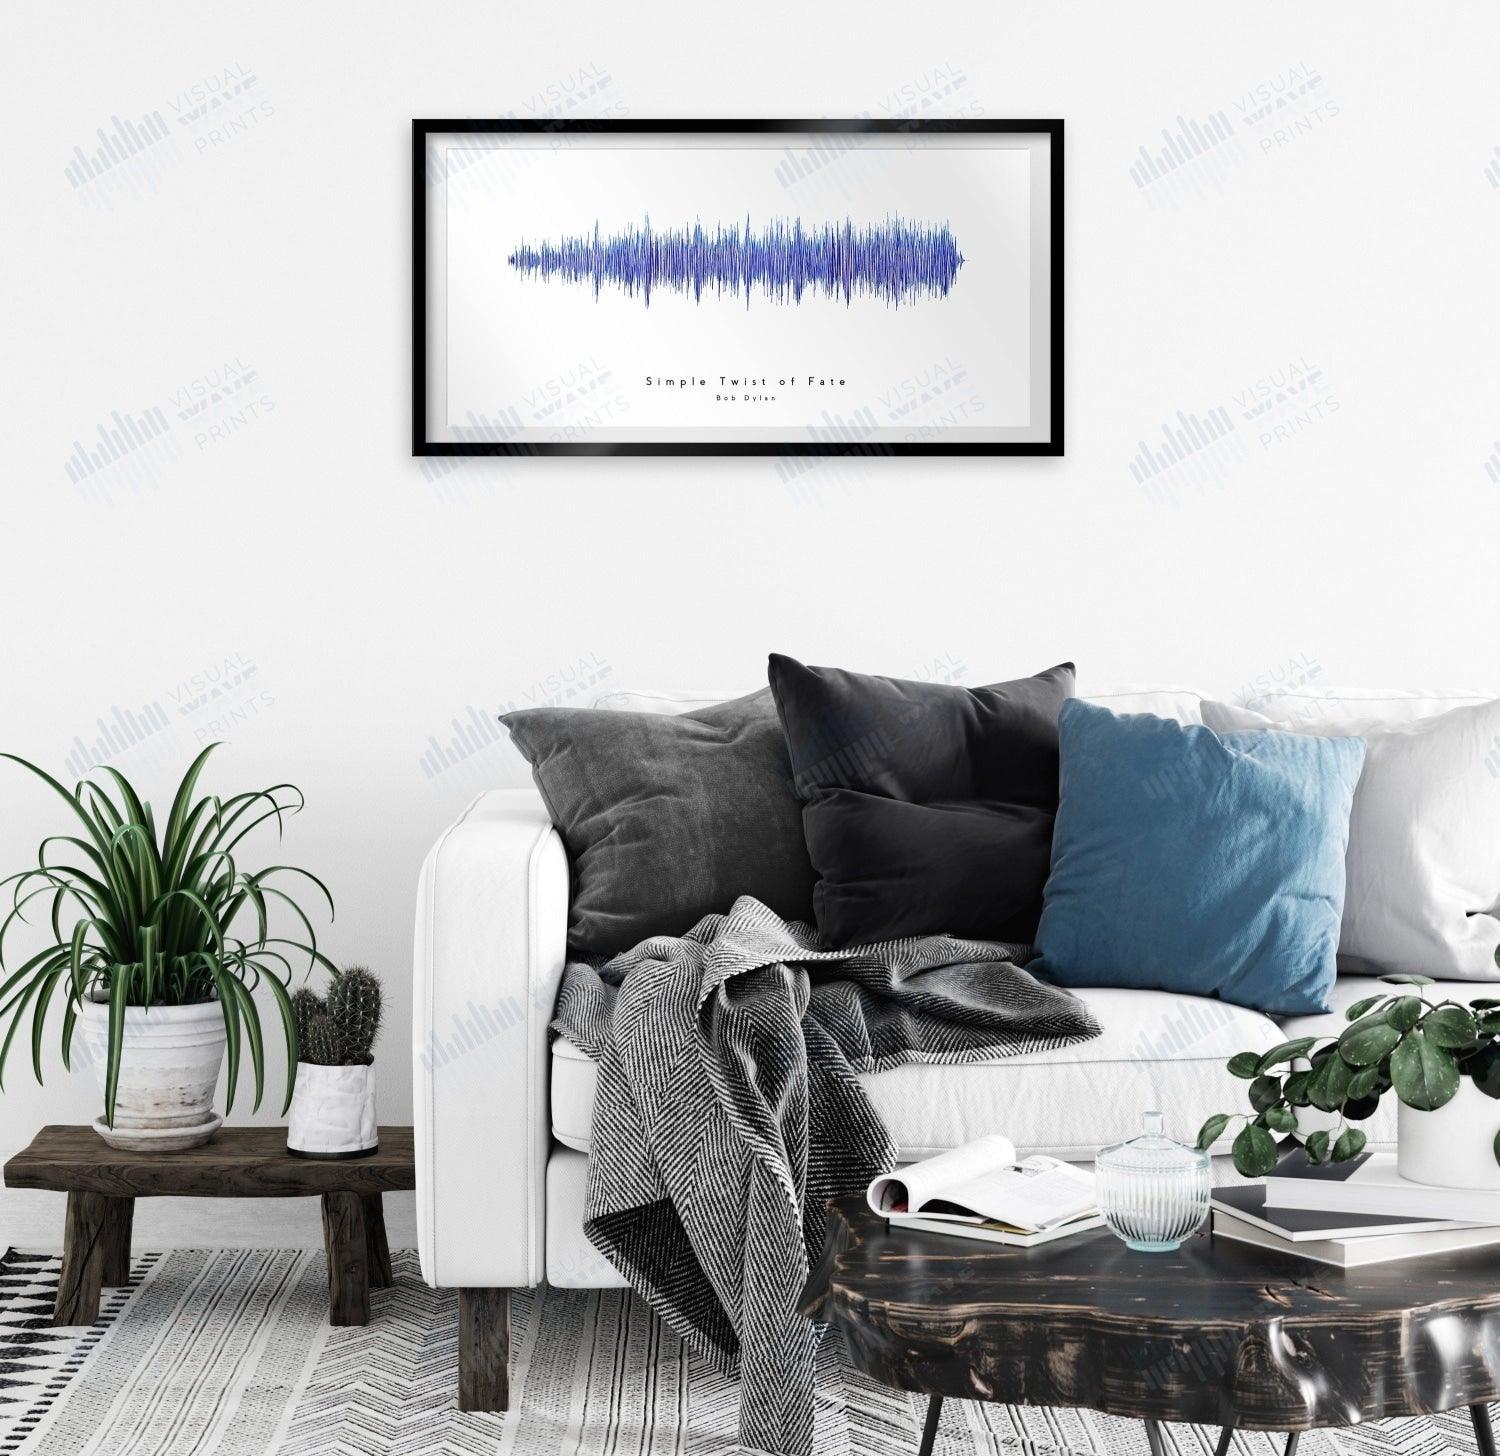 Simple Twist of Fate by Bob Dylan - Visual Wave Prints